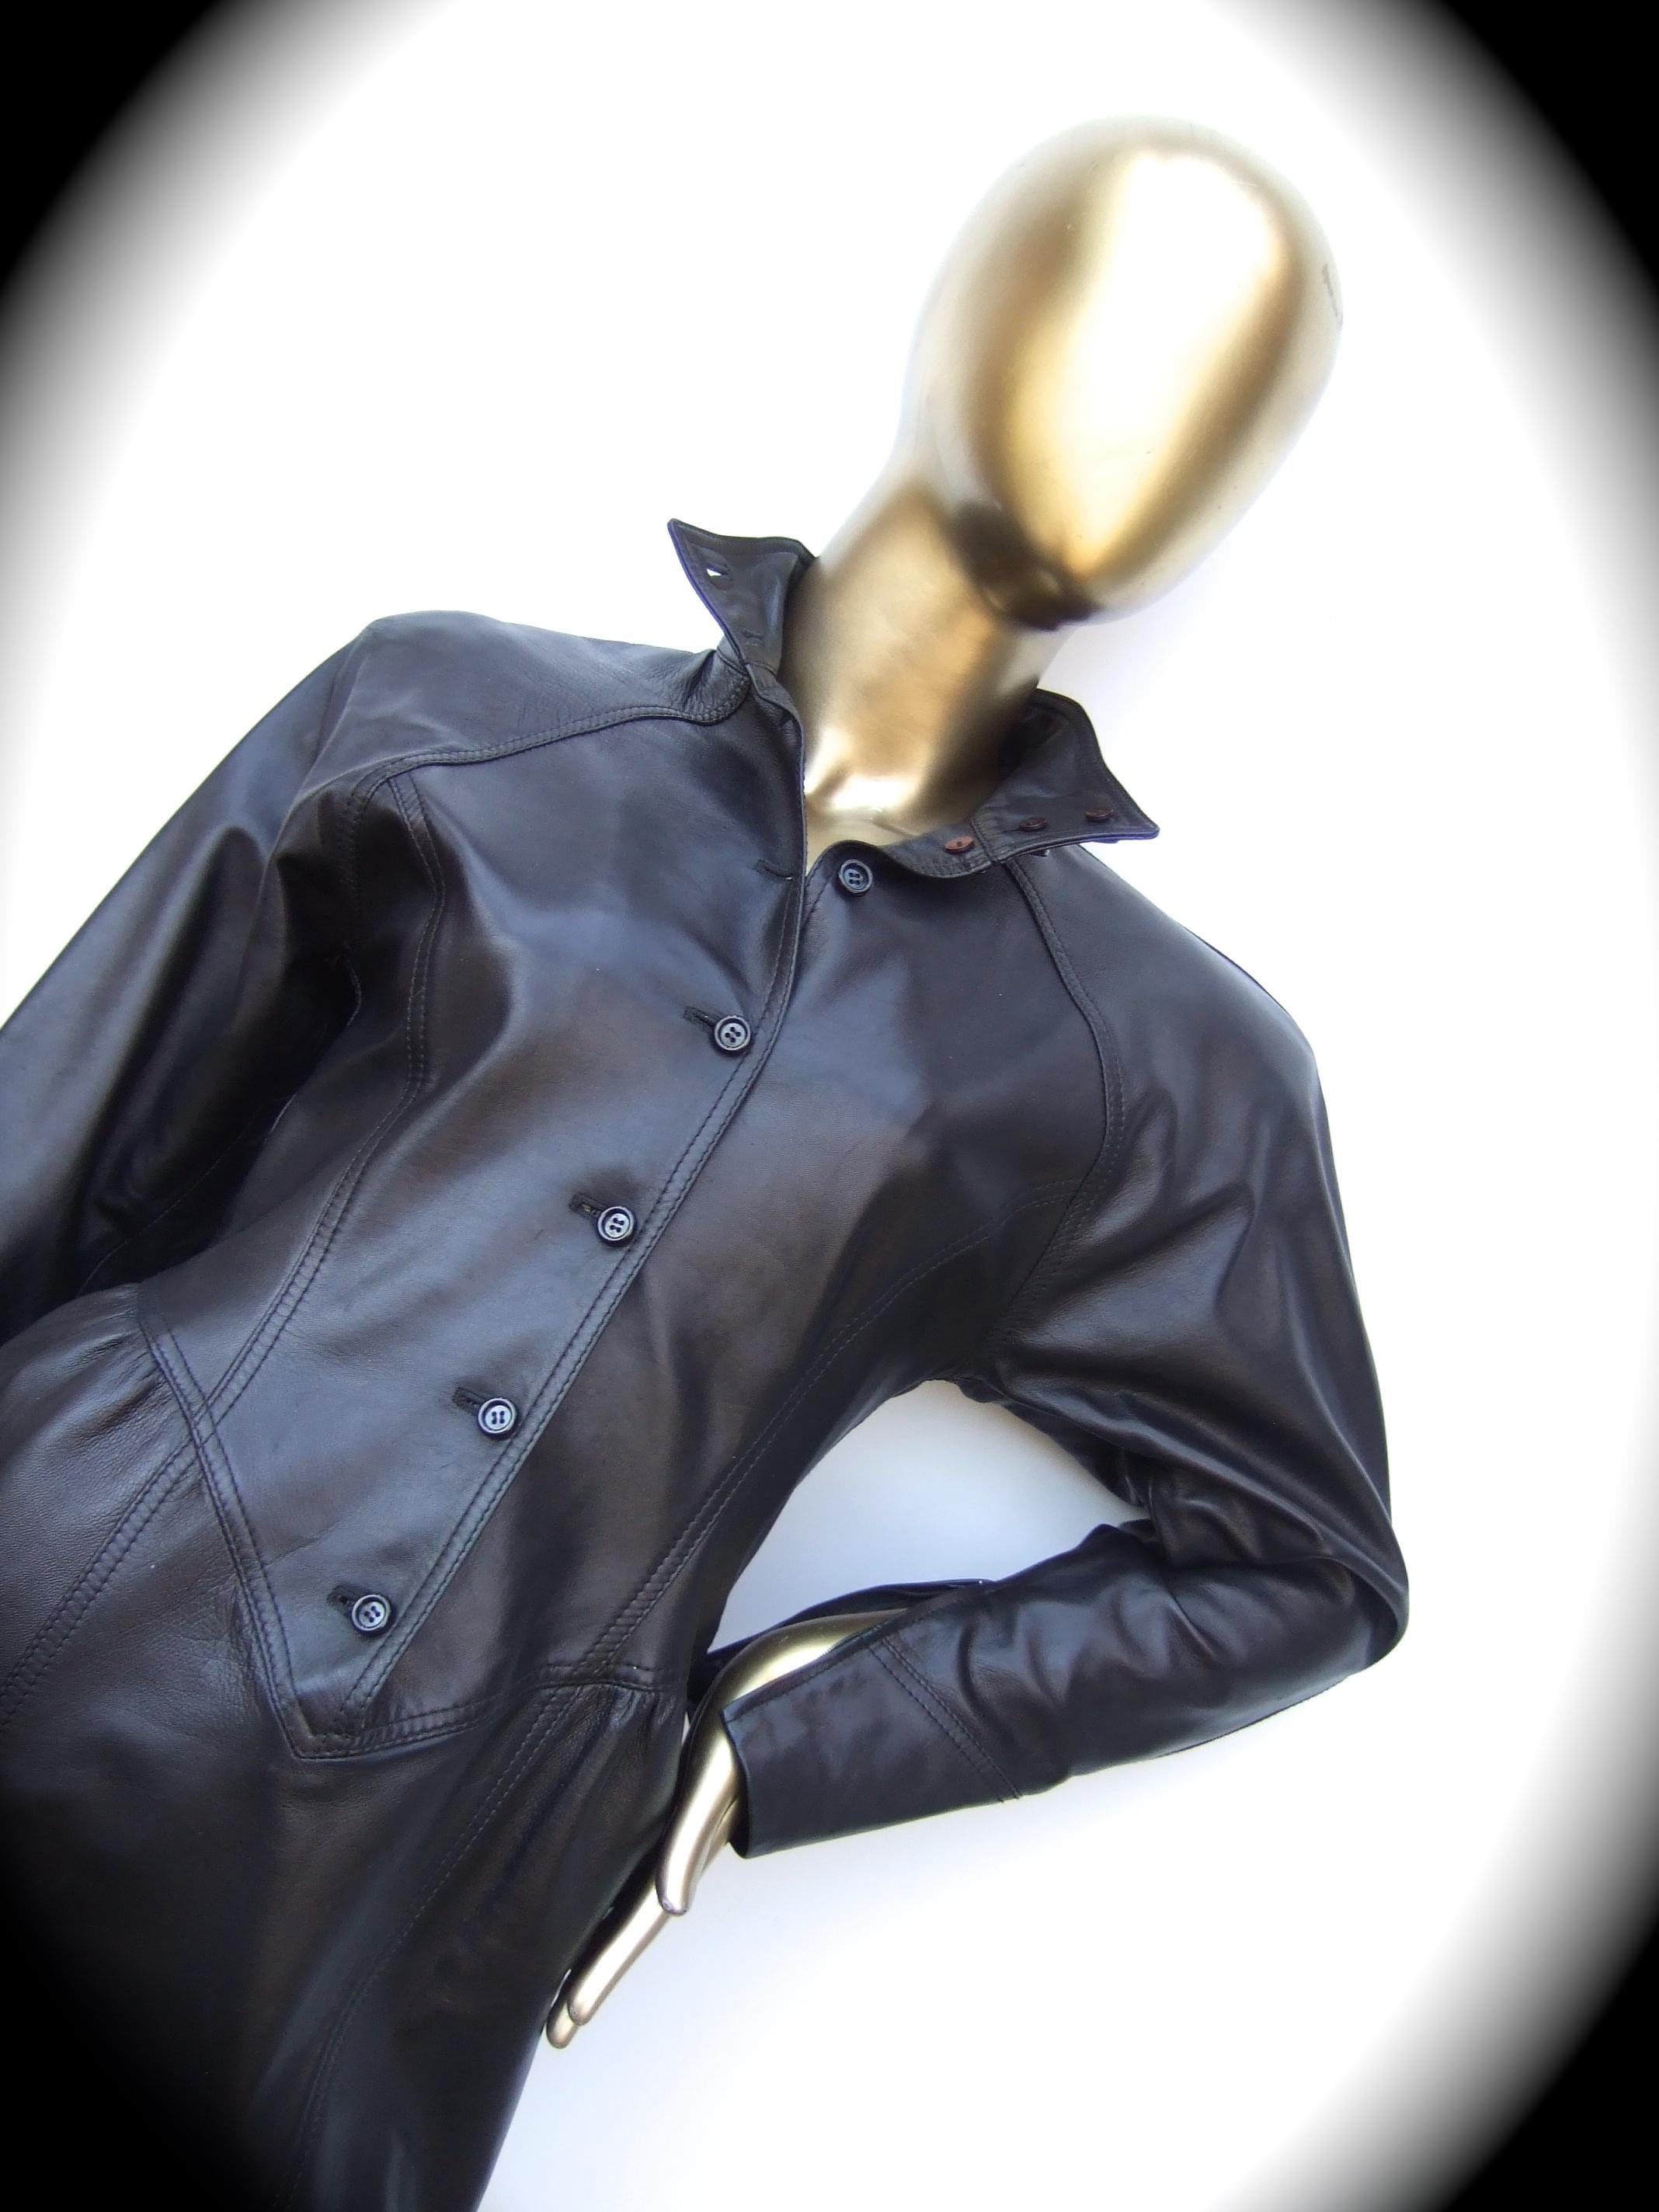 Emanuel Ungaro Paris Avant-garde Edgy Brown Leather Dress Made in Italy c 1980s For Sale 7